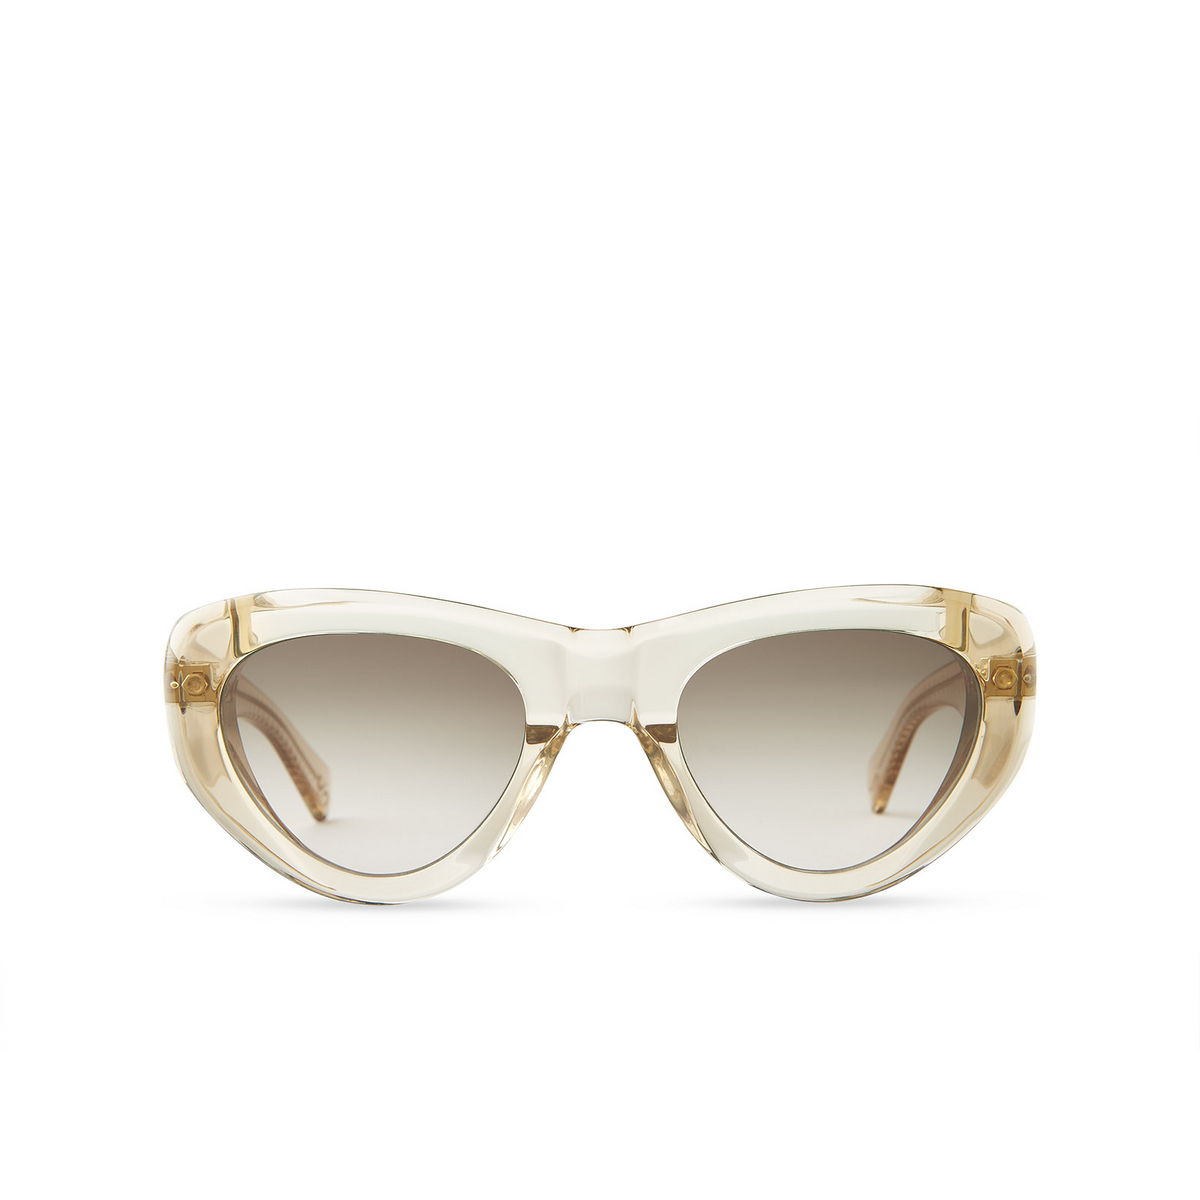 Mr. Leight REVELER S Sunglasses CHAND-12KG/SFFERNG Chandelier-12K White Gold - front view